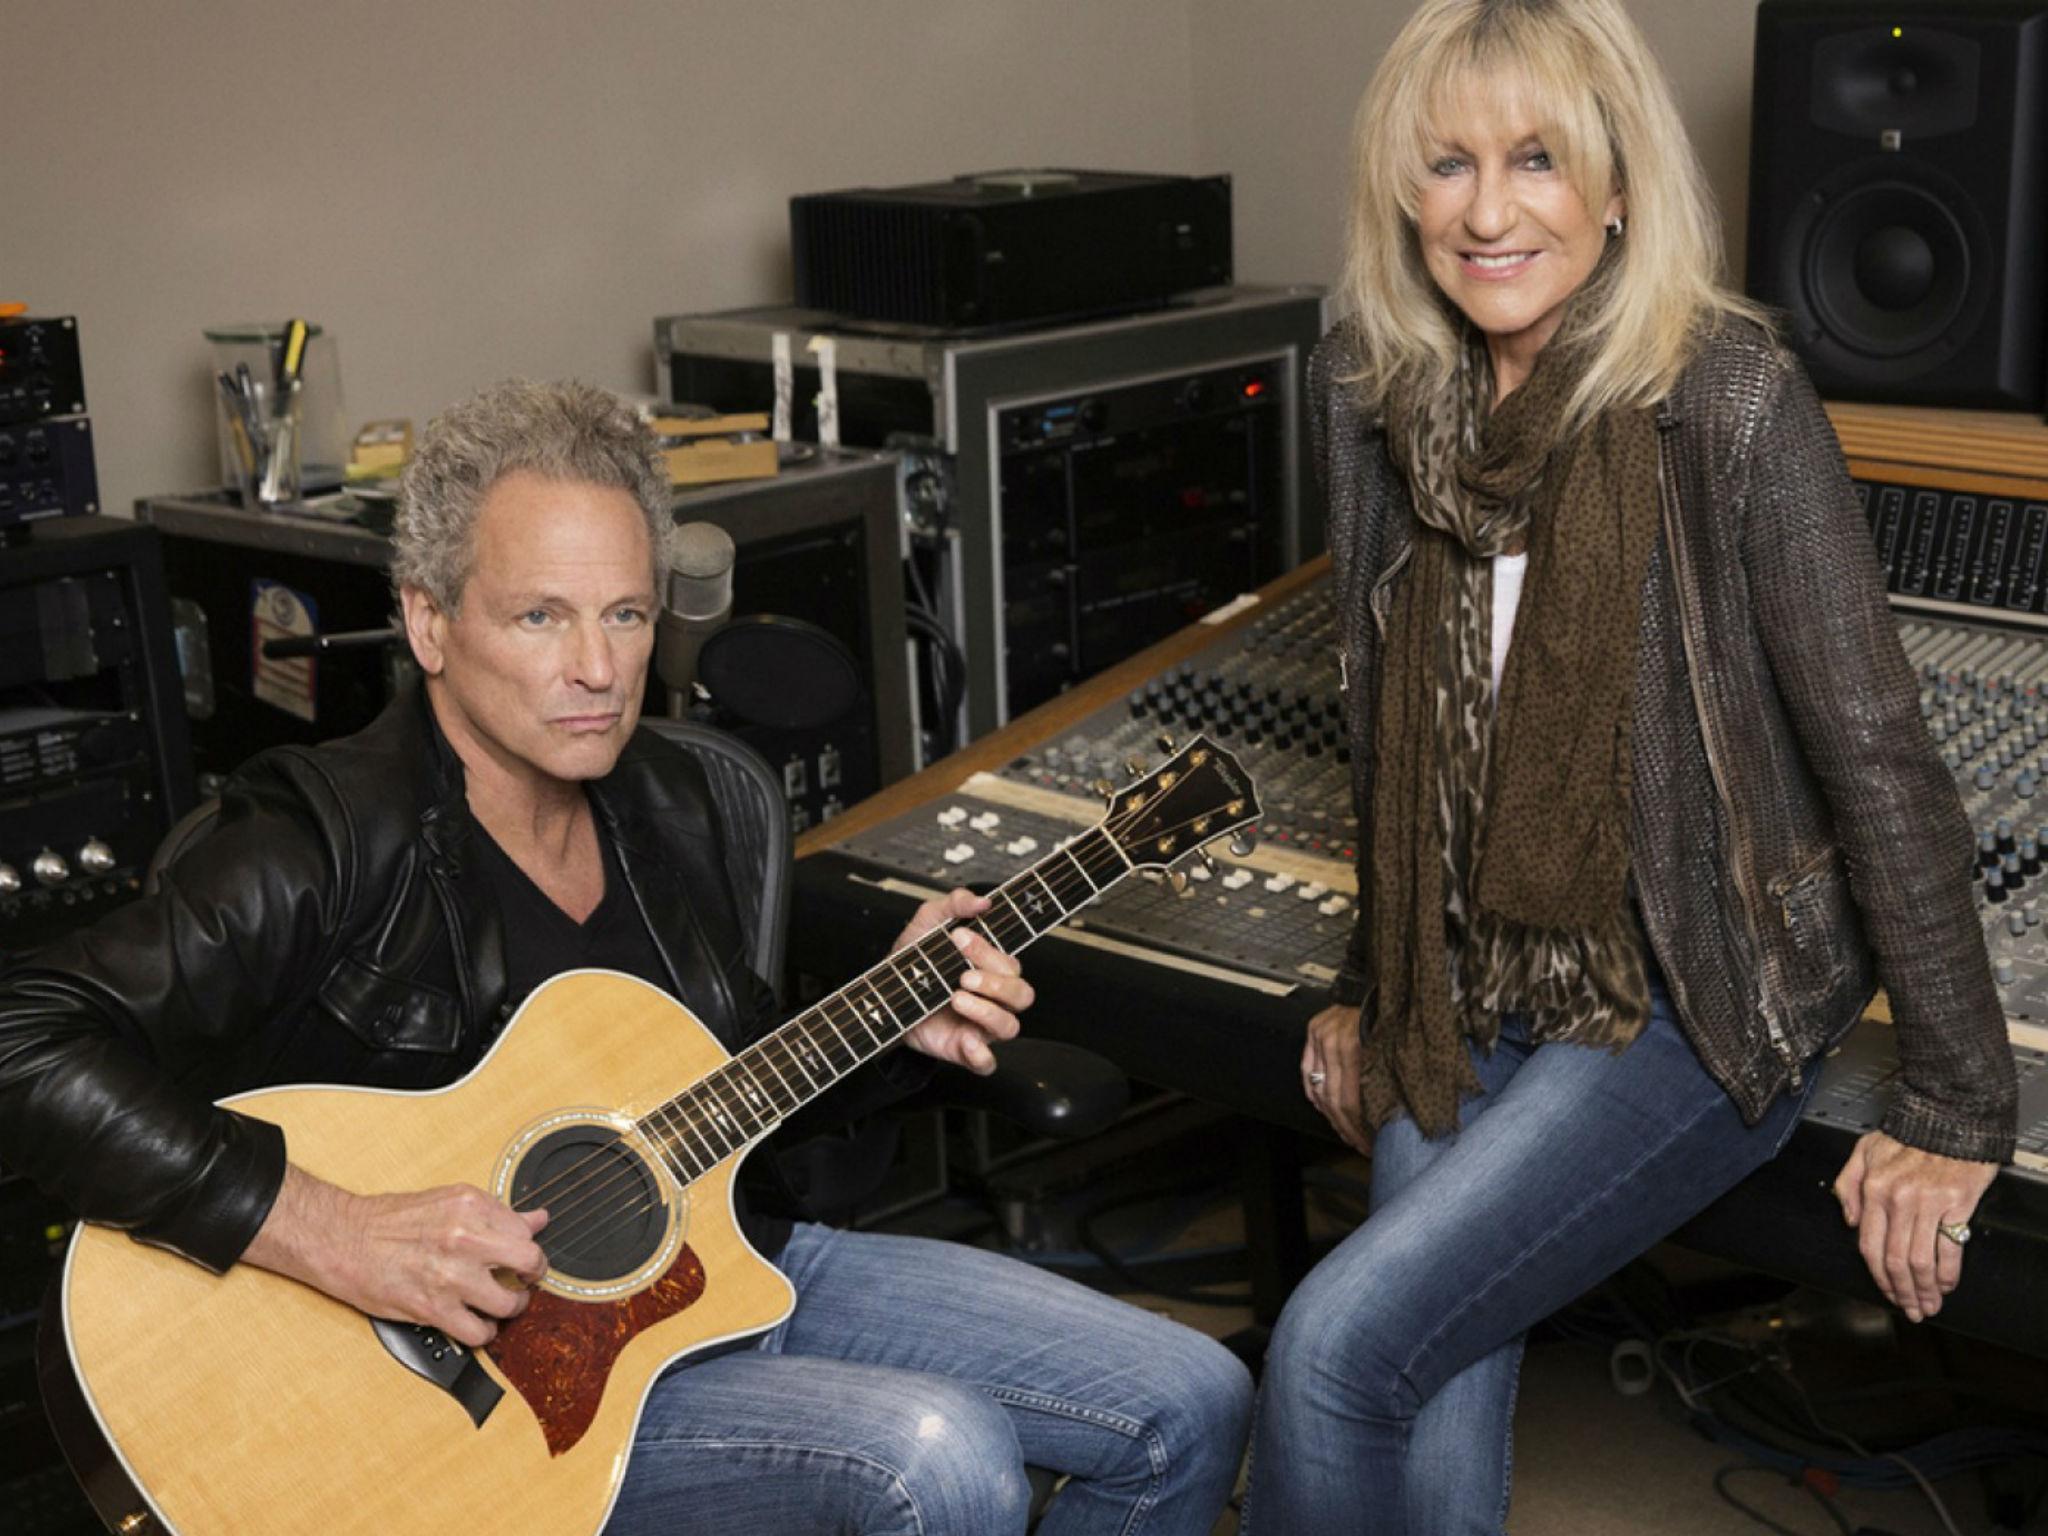 Lindsey Buckingham (left) and Christine McVie (right) began work on their joint album prior to Fleetwood Mac’s 2014 tour